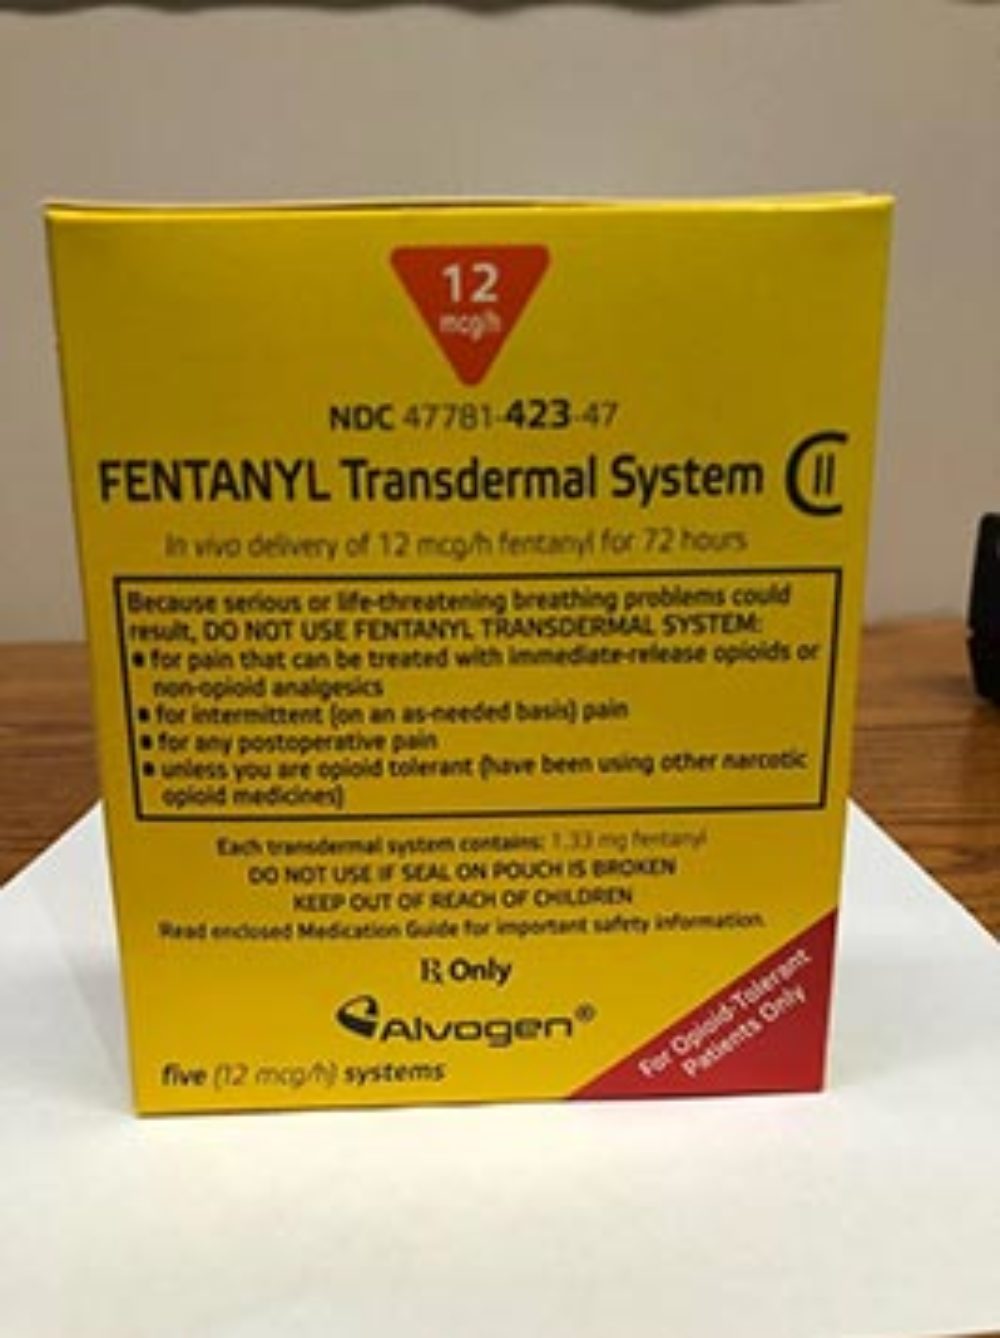 RACGP - Organised crime targeting GPs for potent fentanyl patches